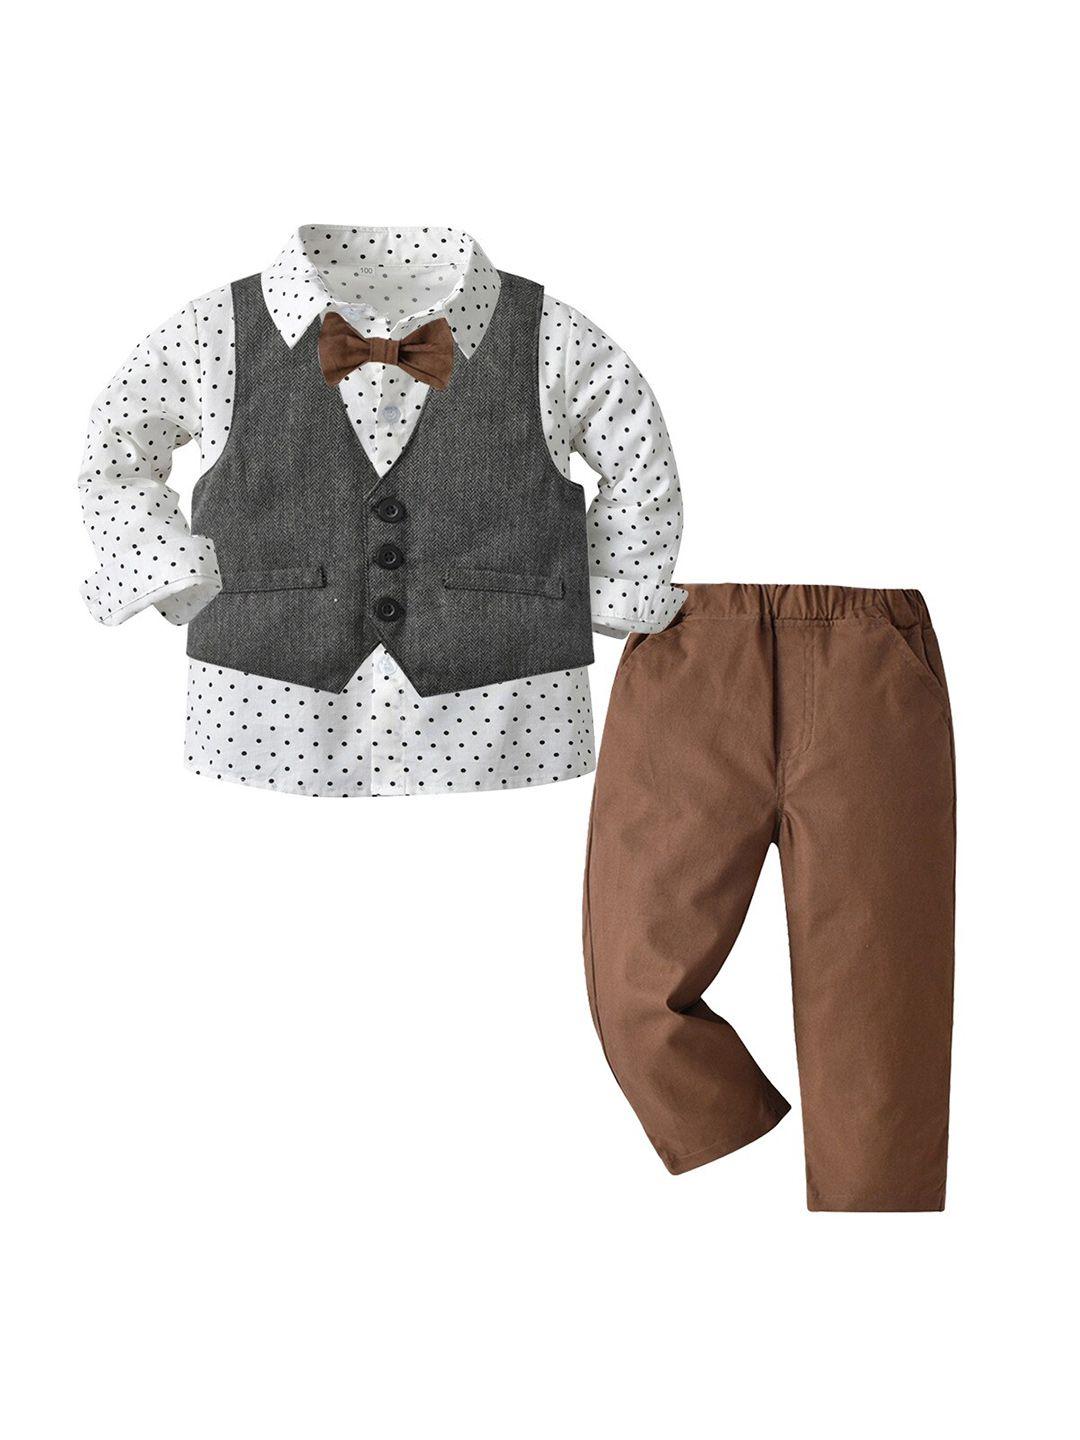 stylecast boys white & brown polka dot printed 3 piece suit